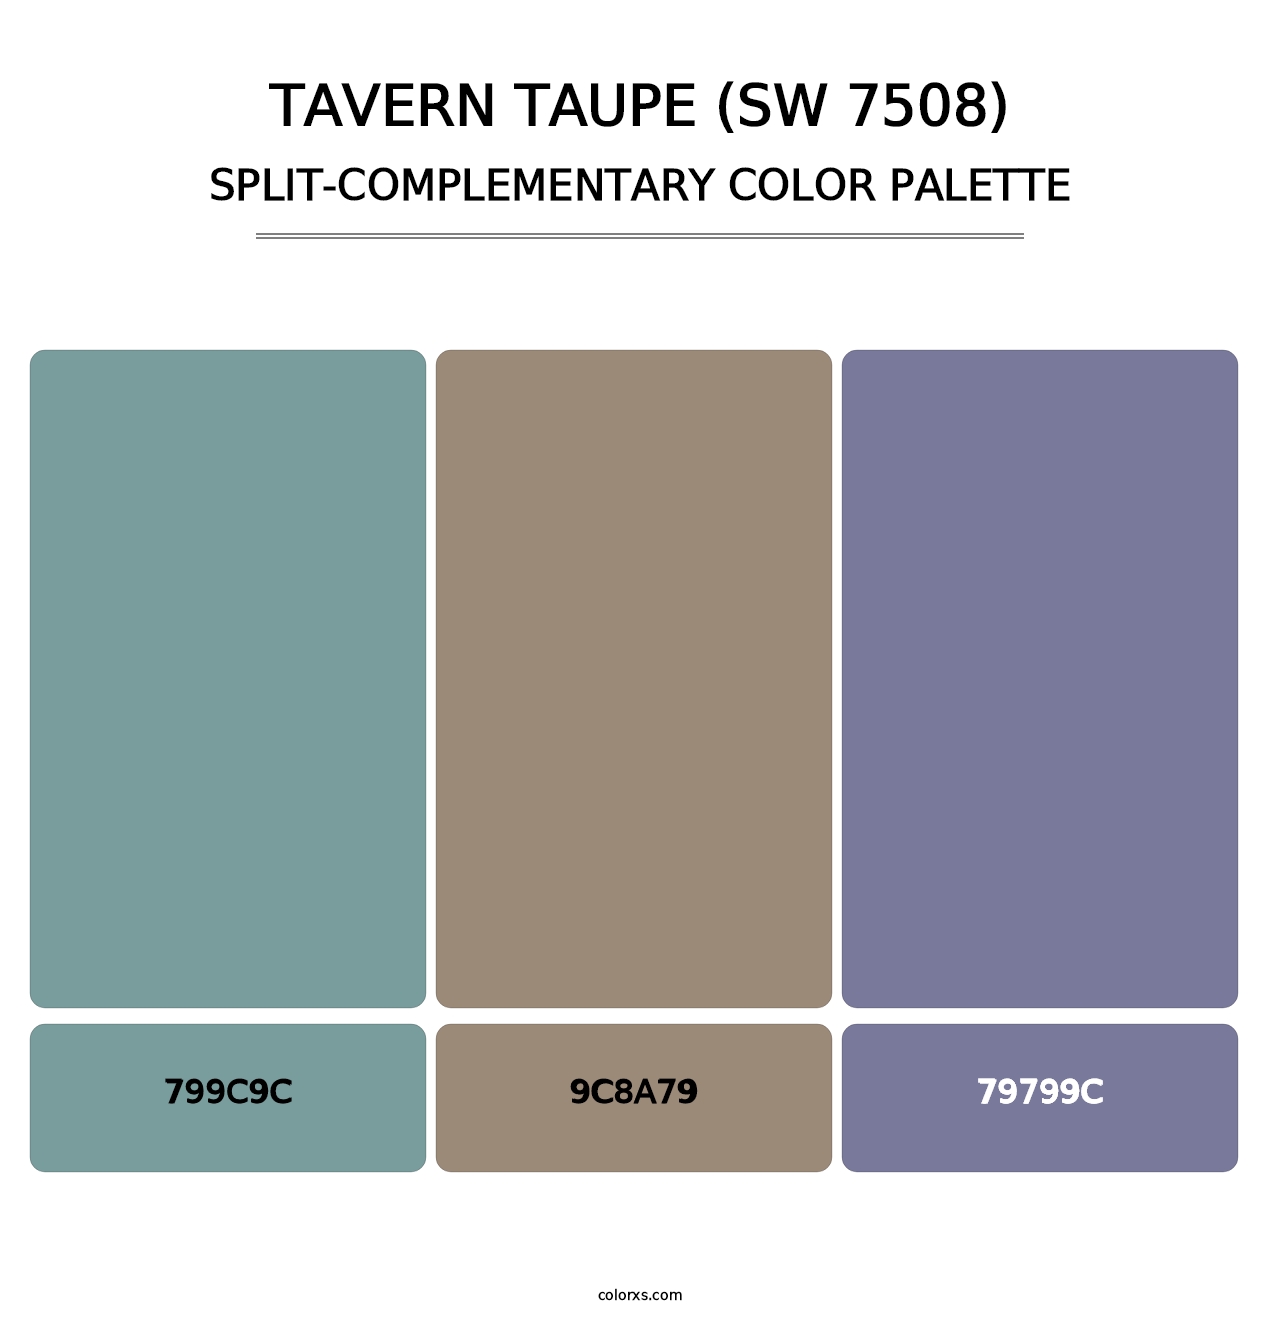 Tavern Taupe (SW 7508) - Split-Complementary Color Palette